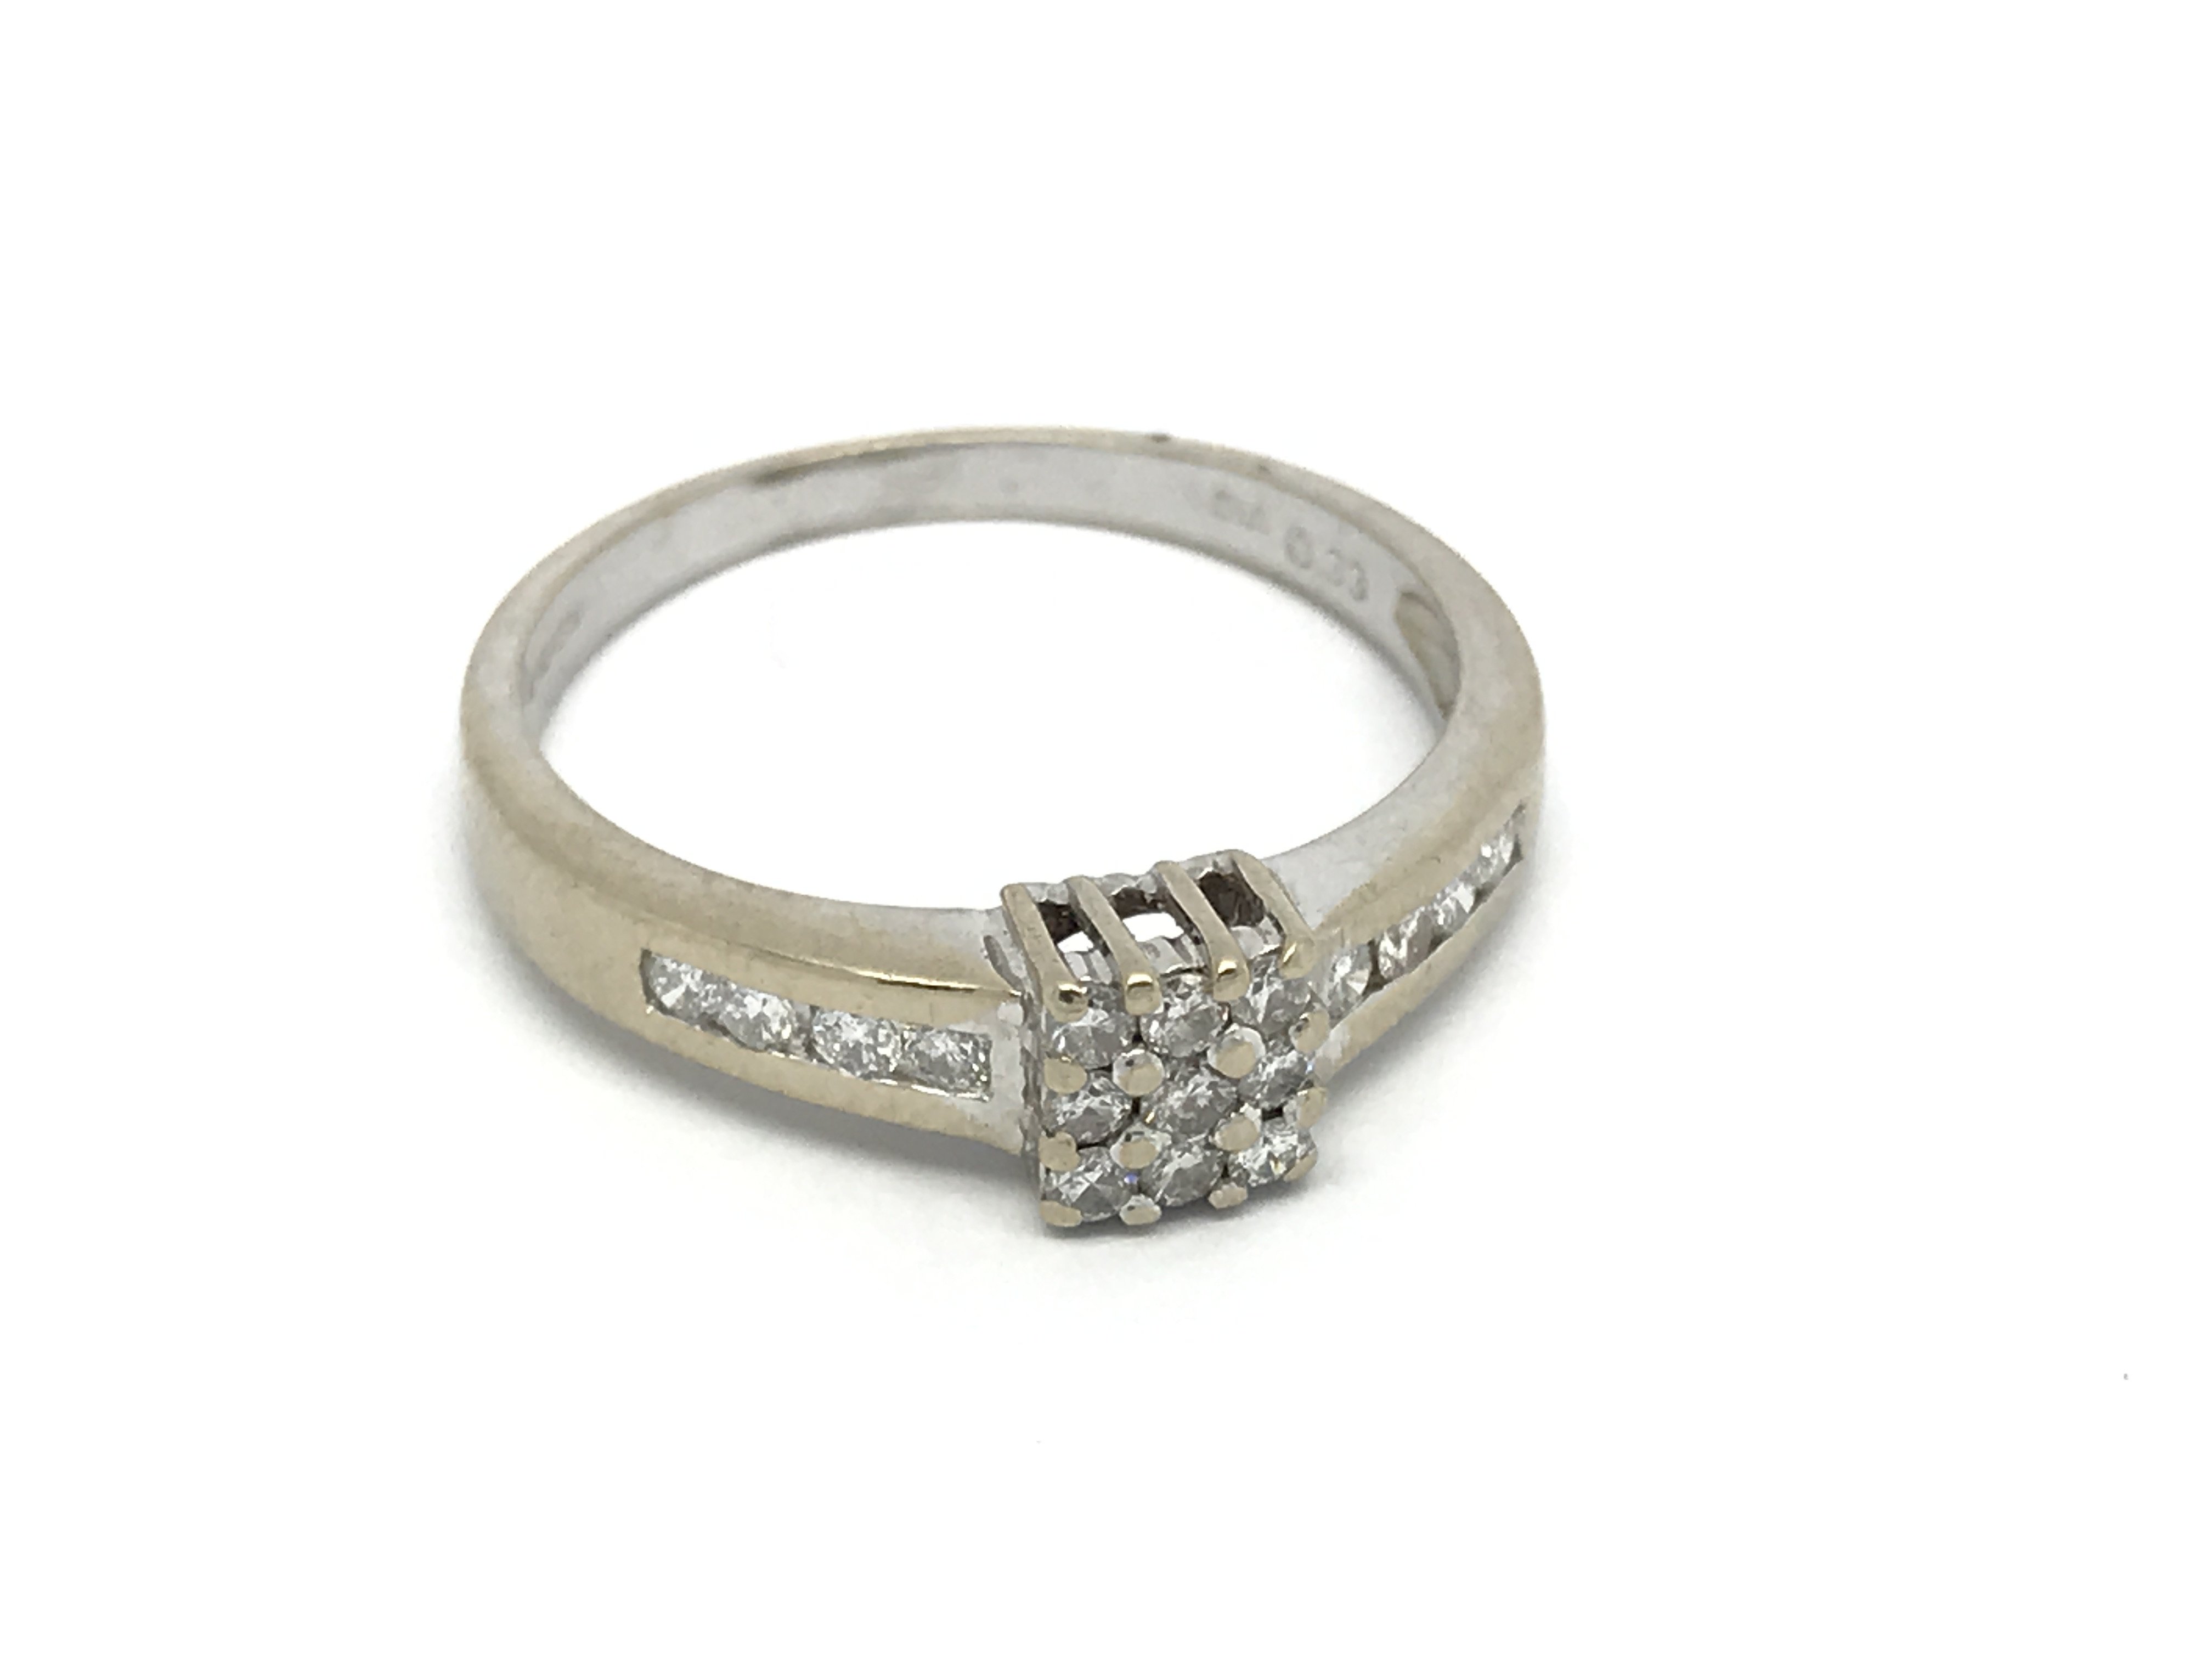 An 18carat gold ring set with a square pattern of